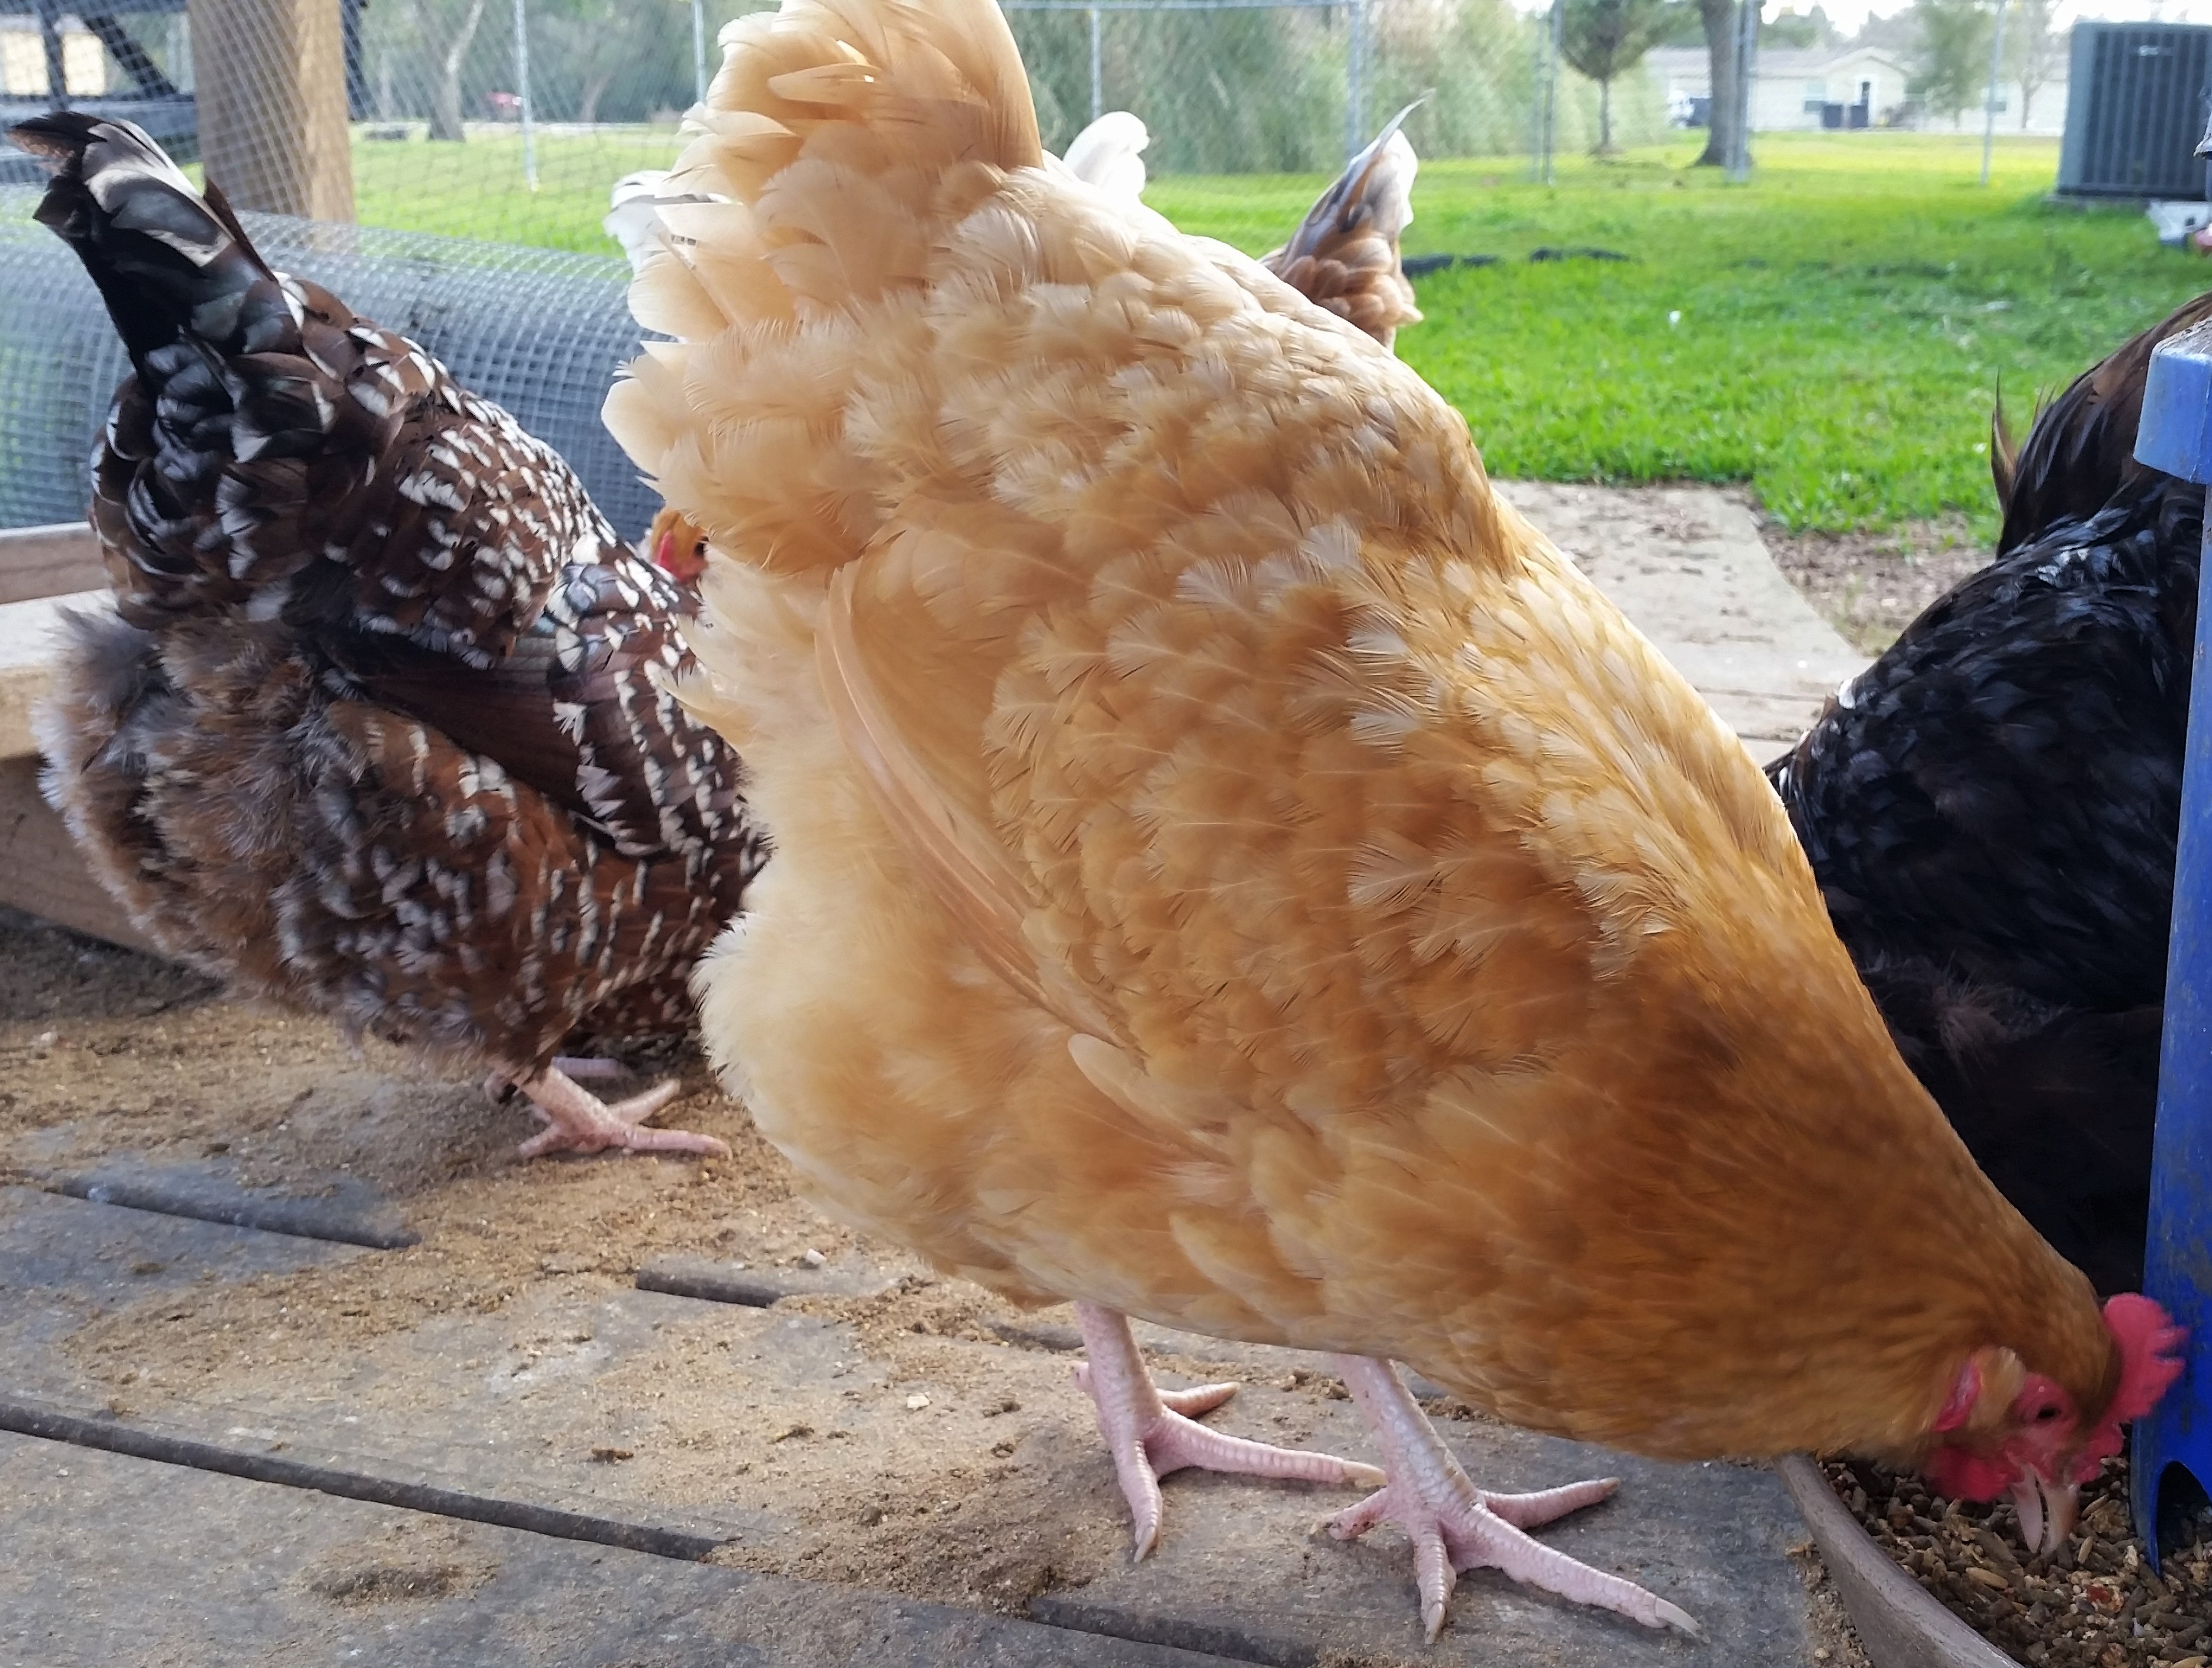 Speckled Sussex "Dotty" 36 weeks and Buff Orpington "Blondie" 37 weeks